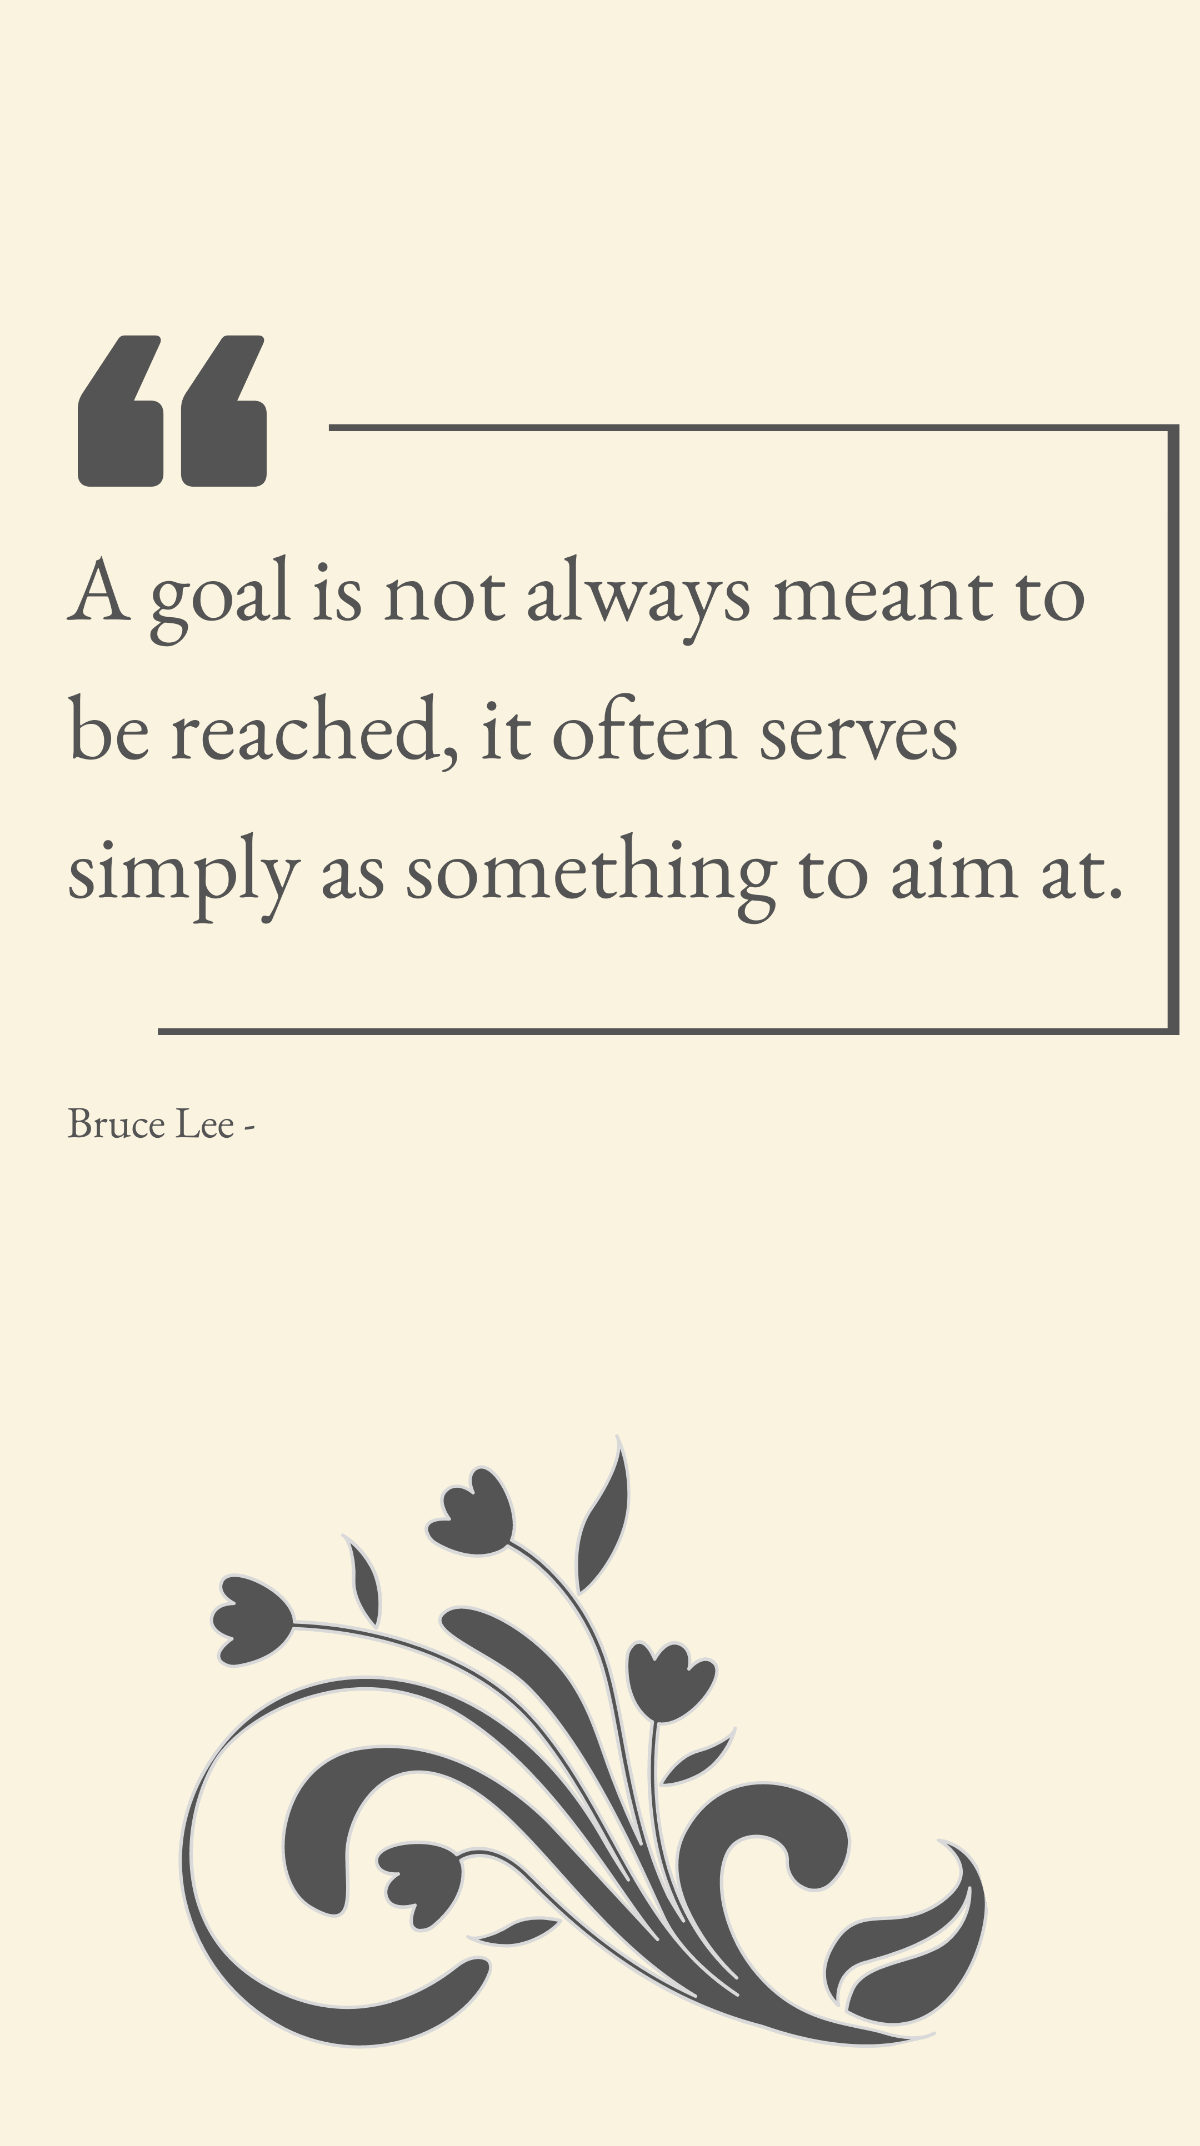 Bruce Lee - A goal is not always meant to be reached, it often serves simply as something to aim at. Template